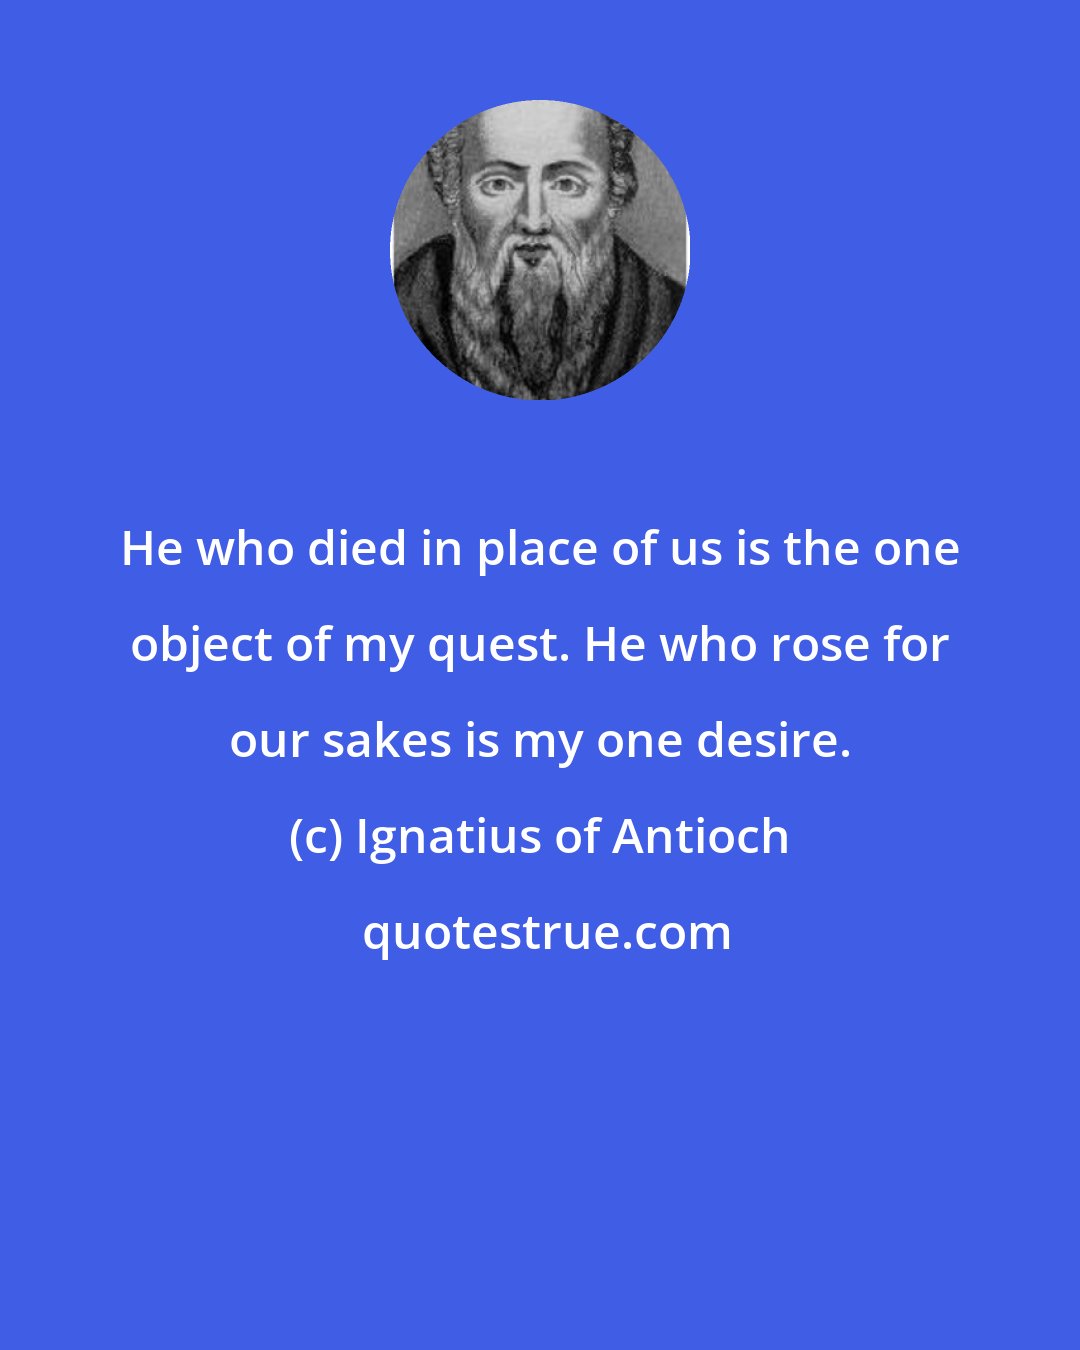 Ignatius of Antioch: He who died in place of us is the one object of my quest. He who rose for our sakes is my one desire.